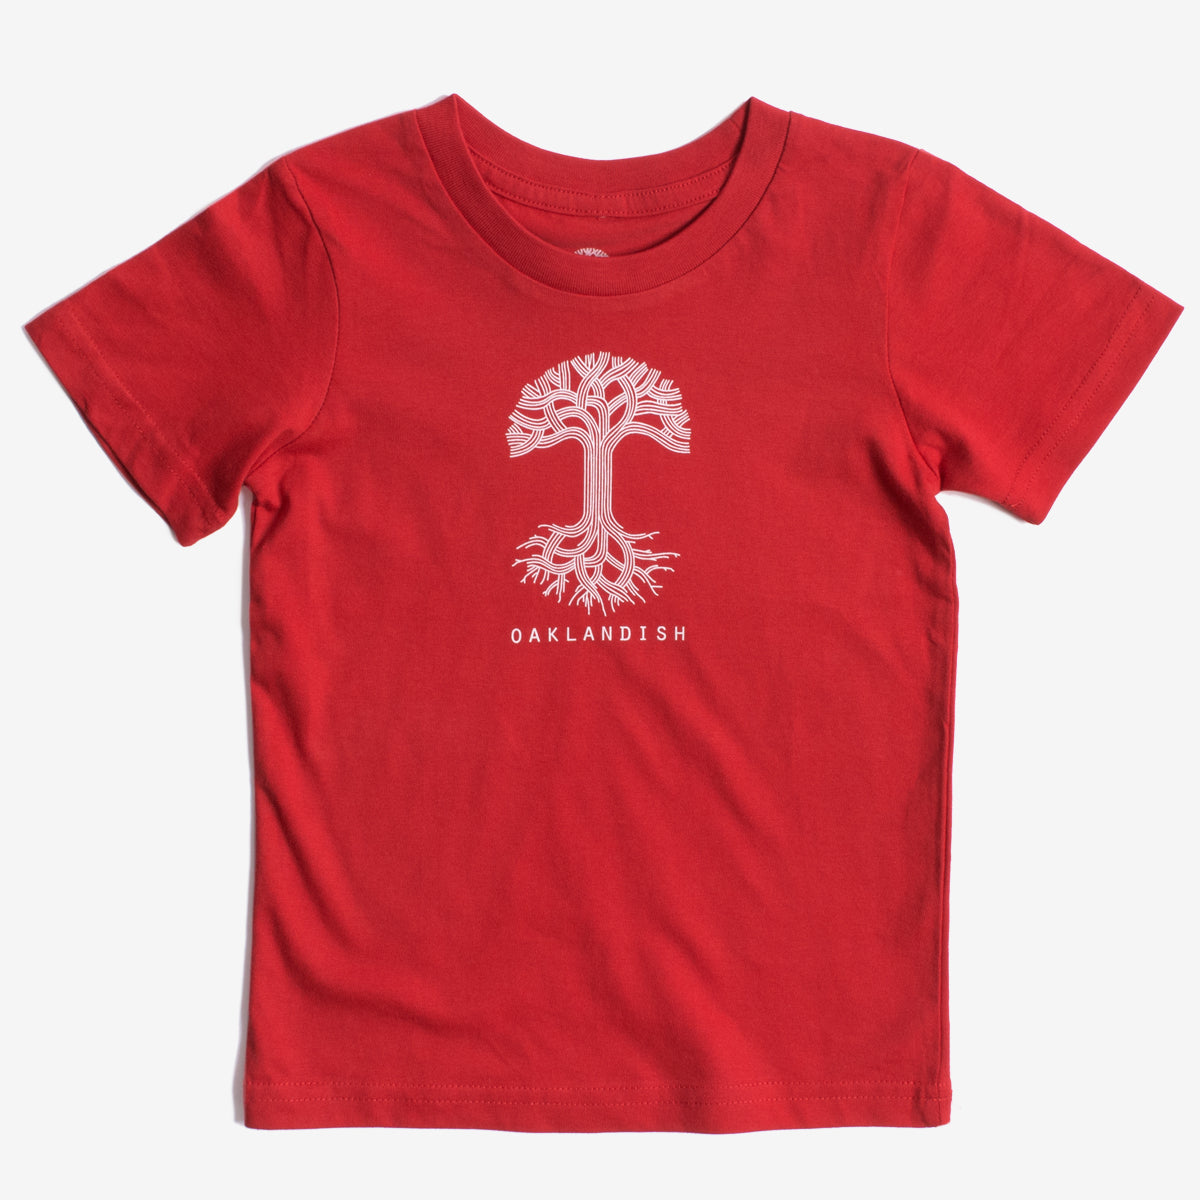 Red toddler-sized t-shirt with white Oaklandish tree logo and wordmark on the chest.